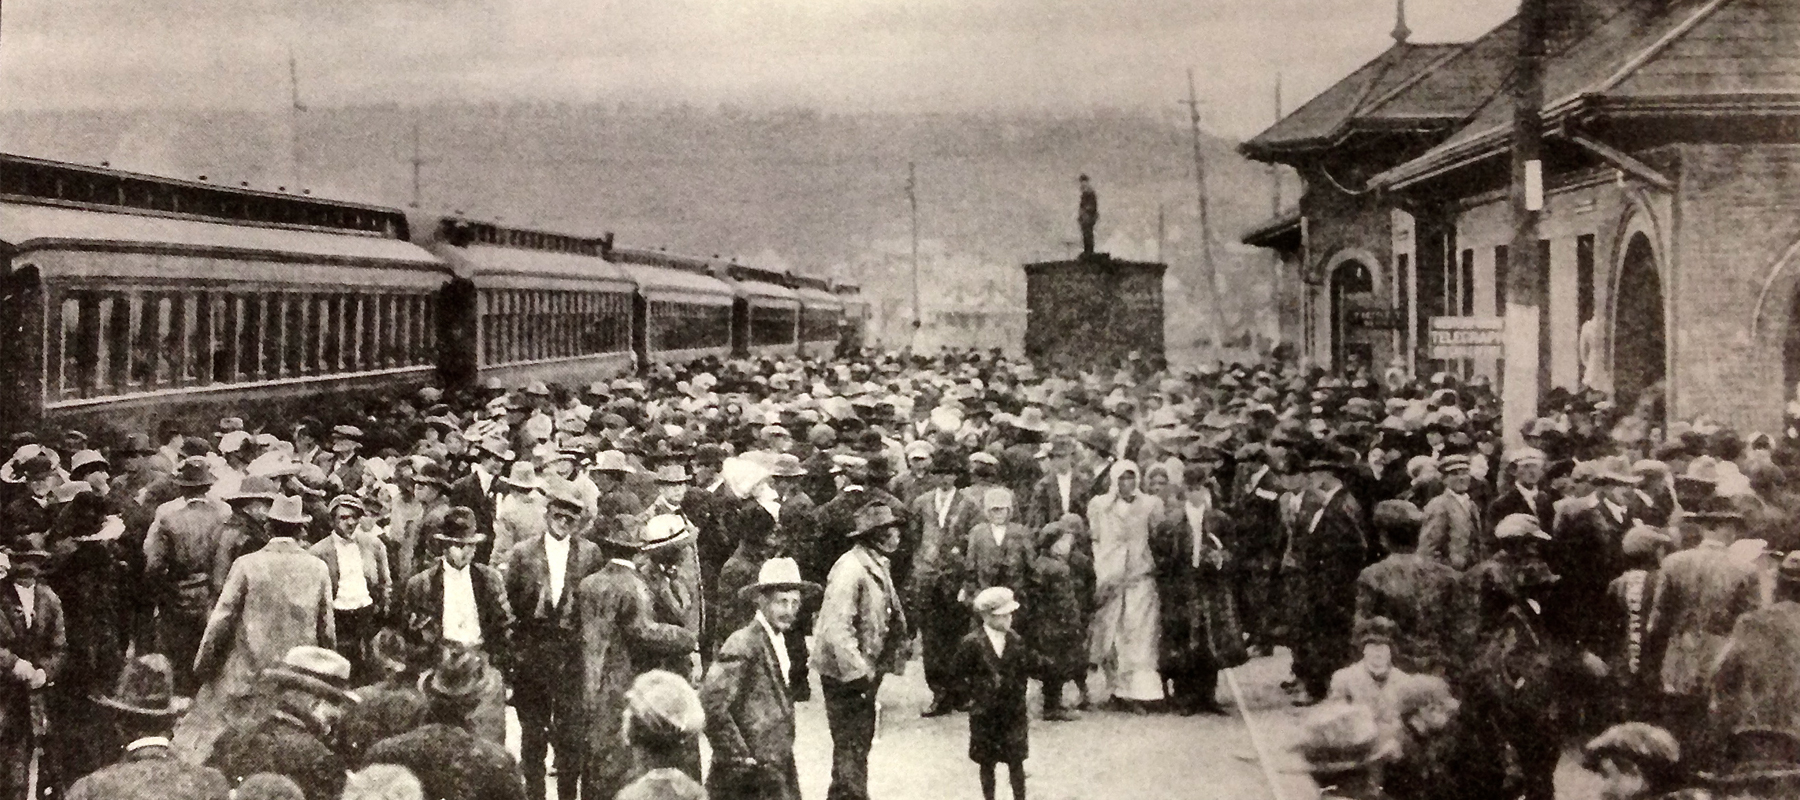 Passengers waiting to board train at The Weatherford, Mineral Wells & Northwestern Railroad circa 1900.